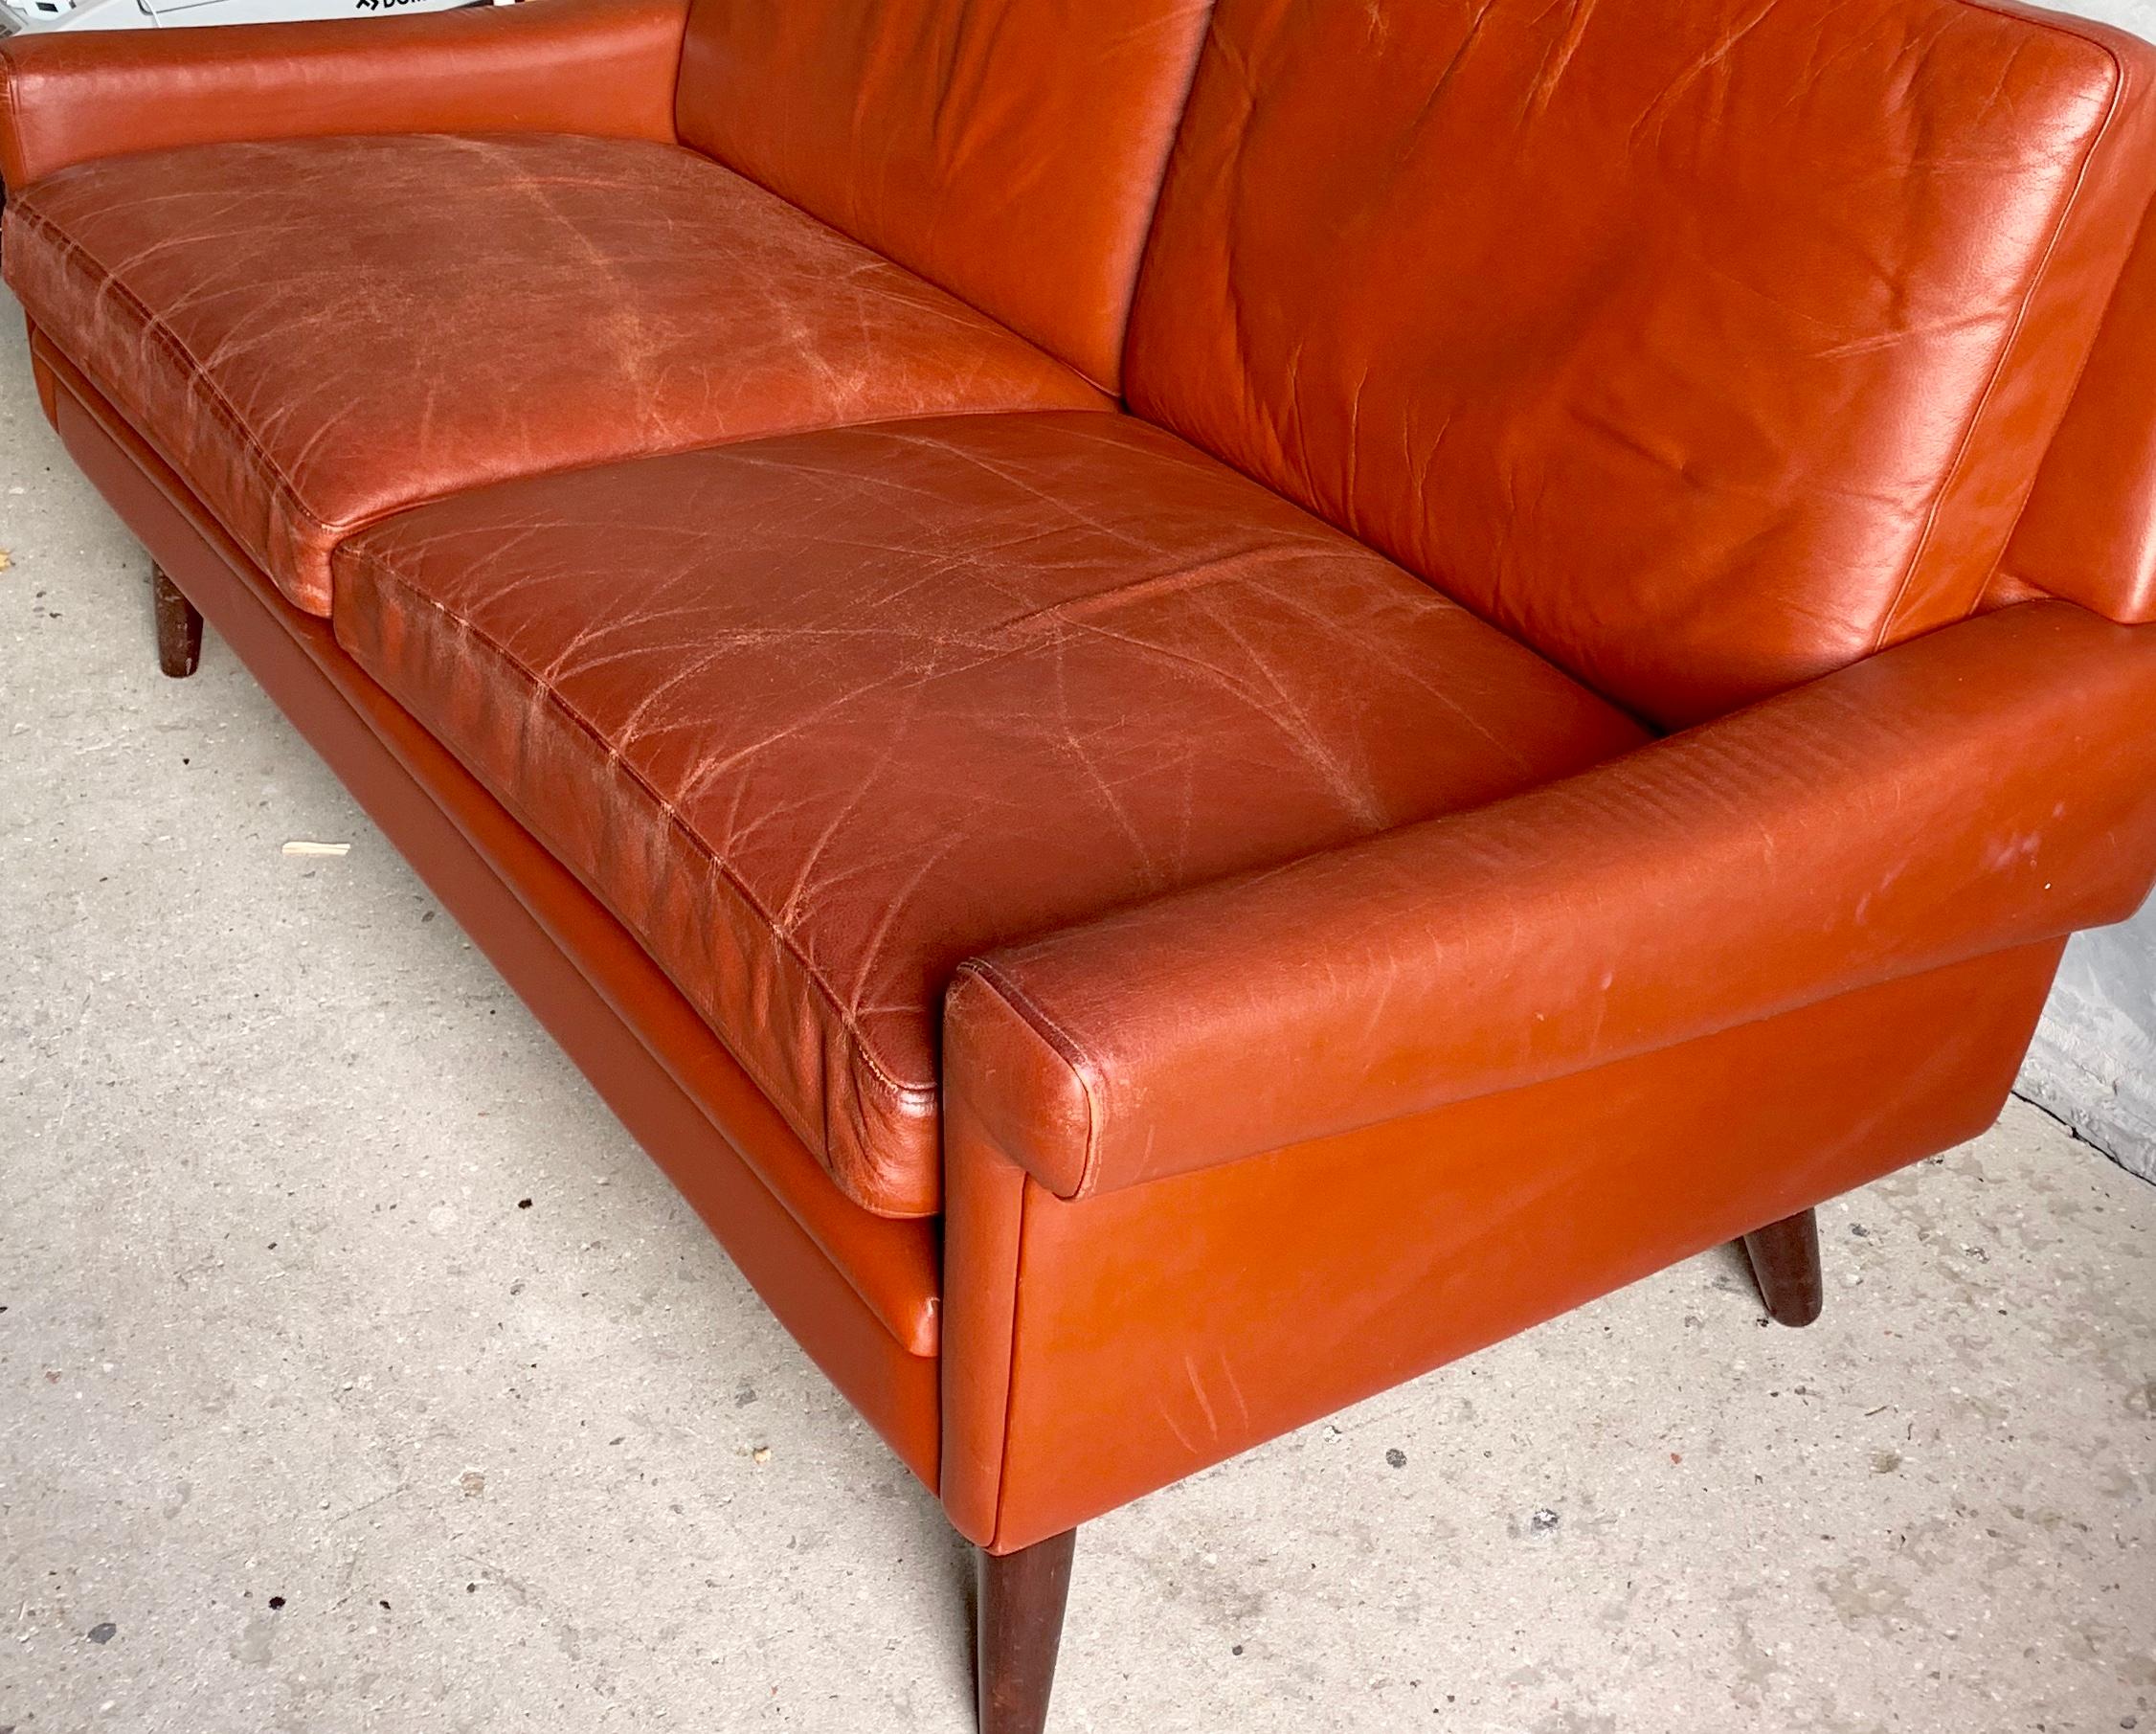 Beautiful Svend skipper sofa designed and produced in Denmark. Covered with red leather, with round tapered legs.